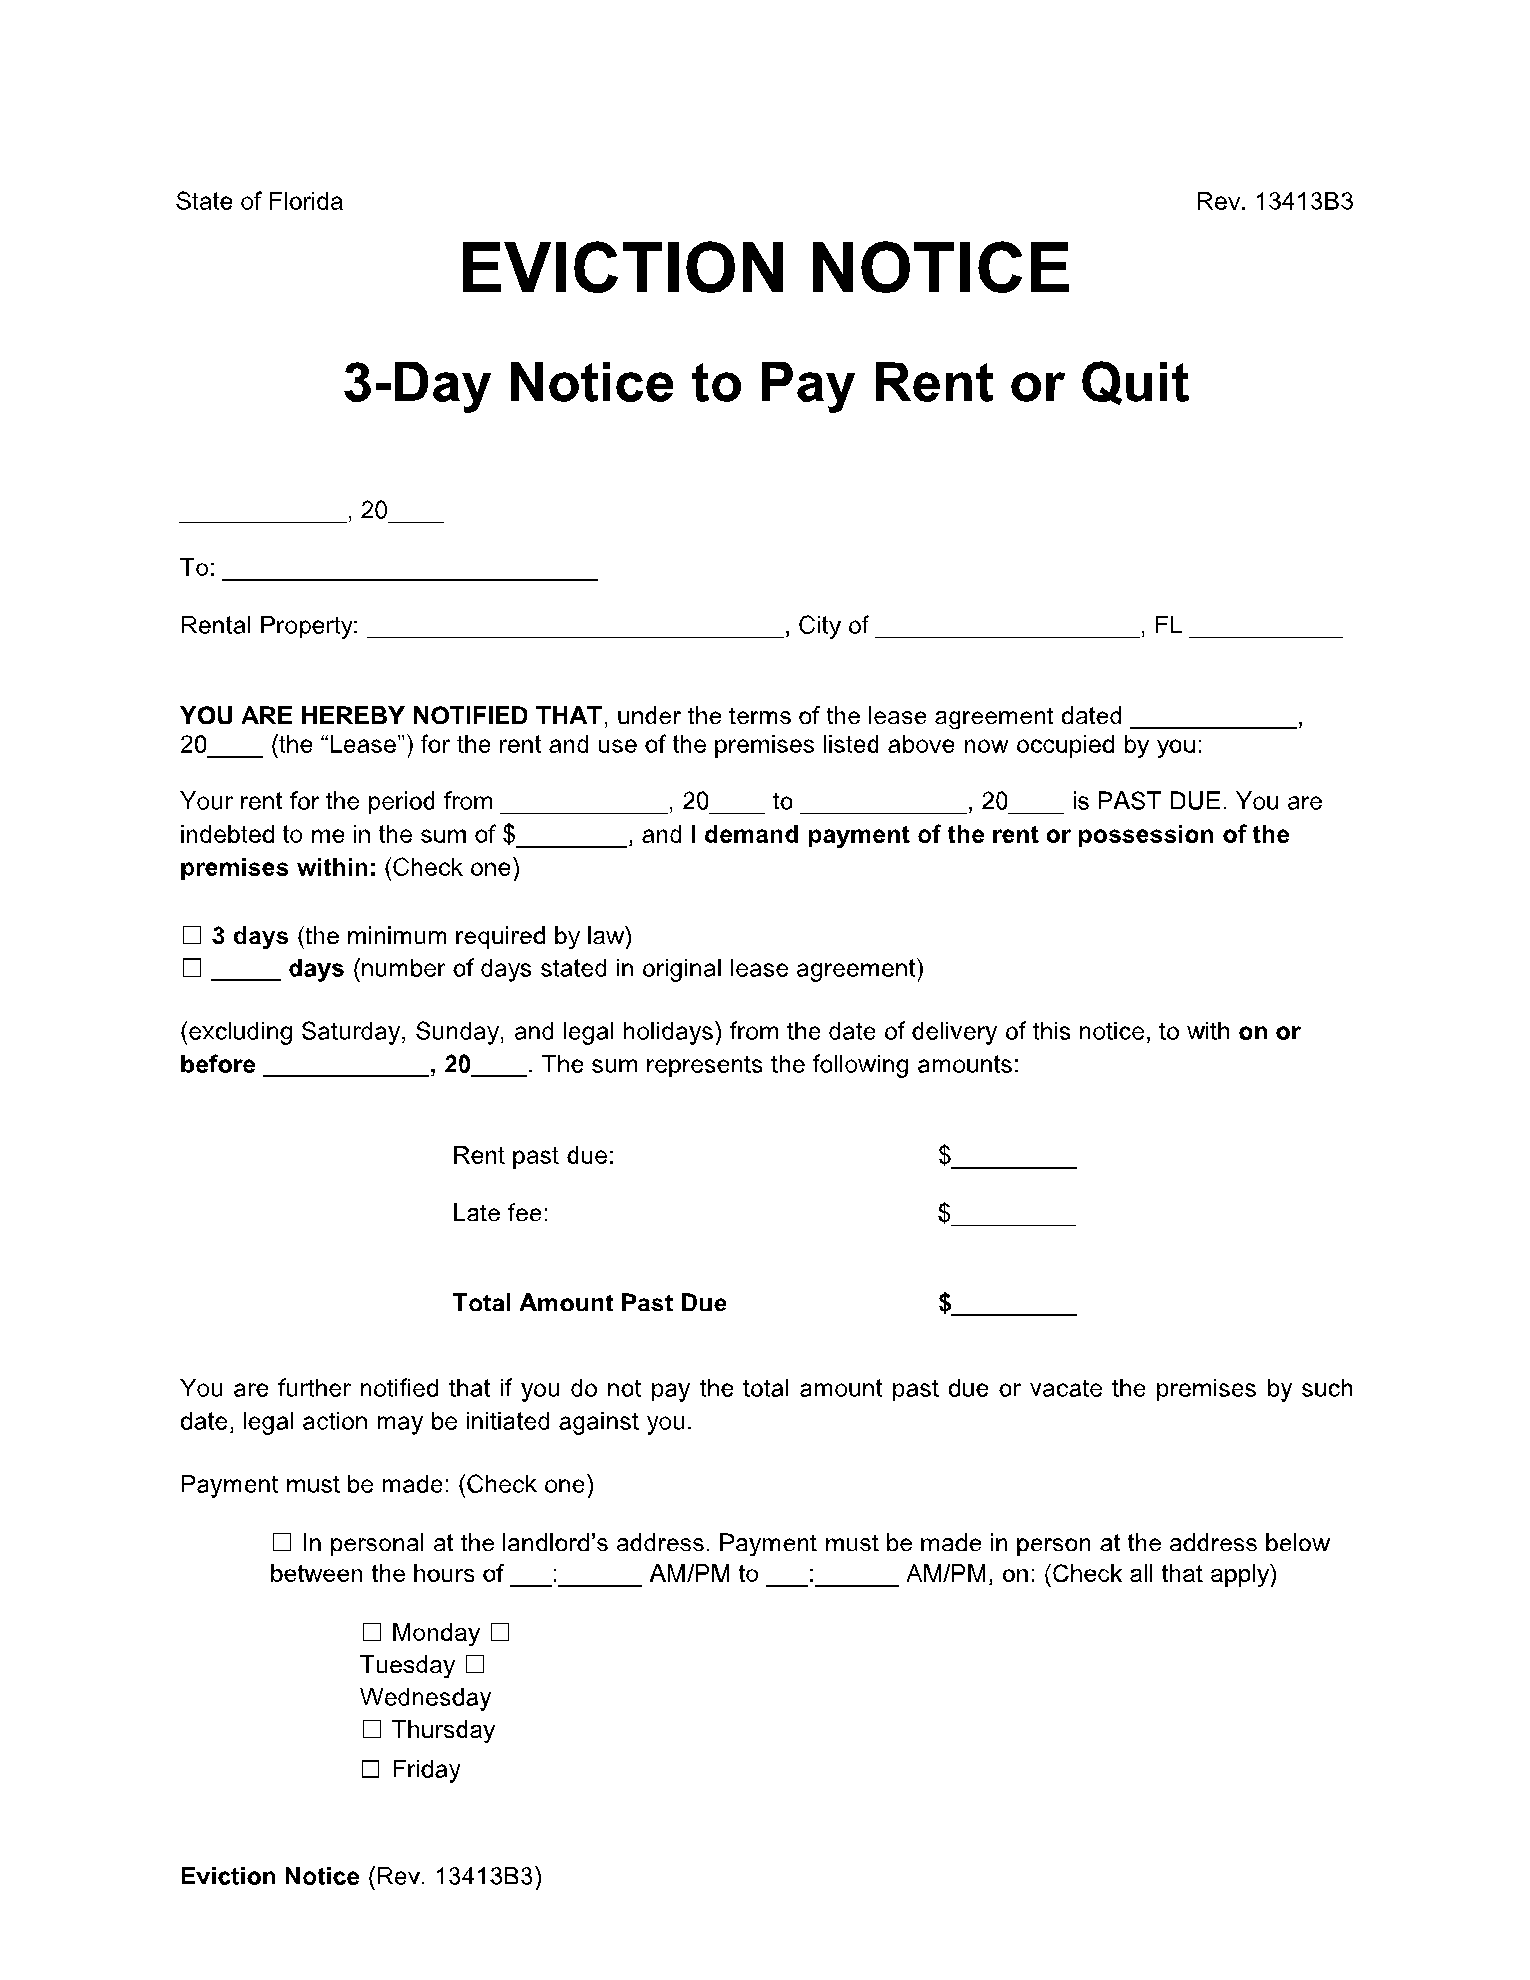 Florida 3-Day Eviction Notice Forms